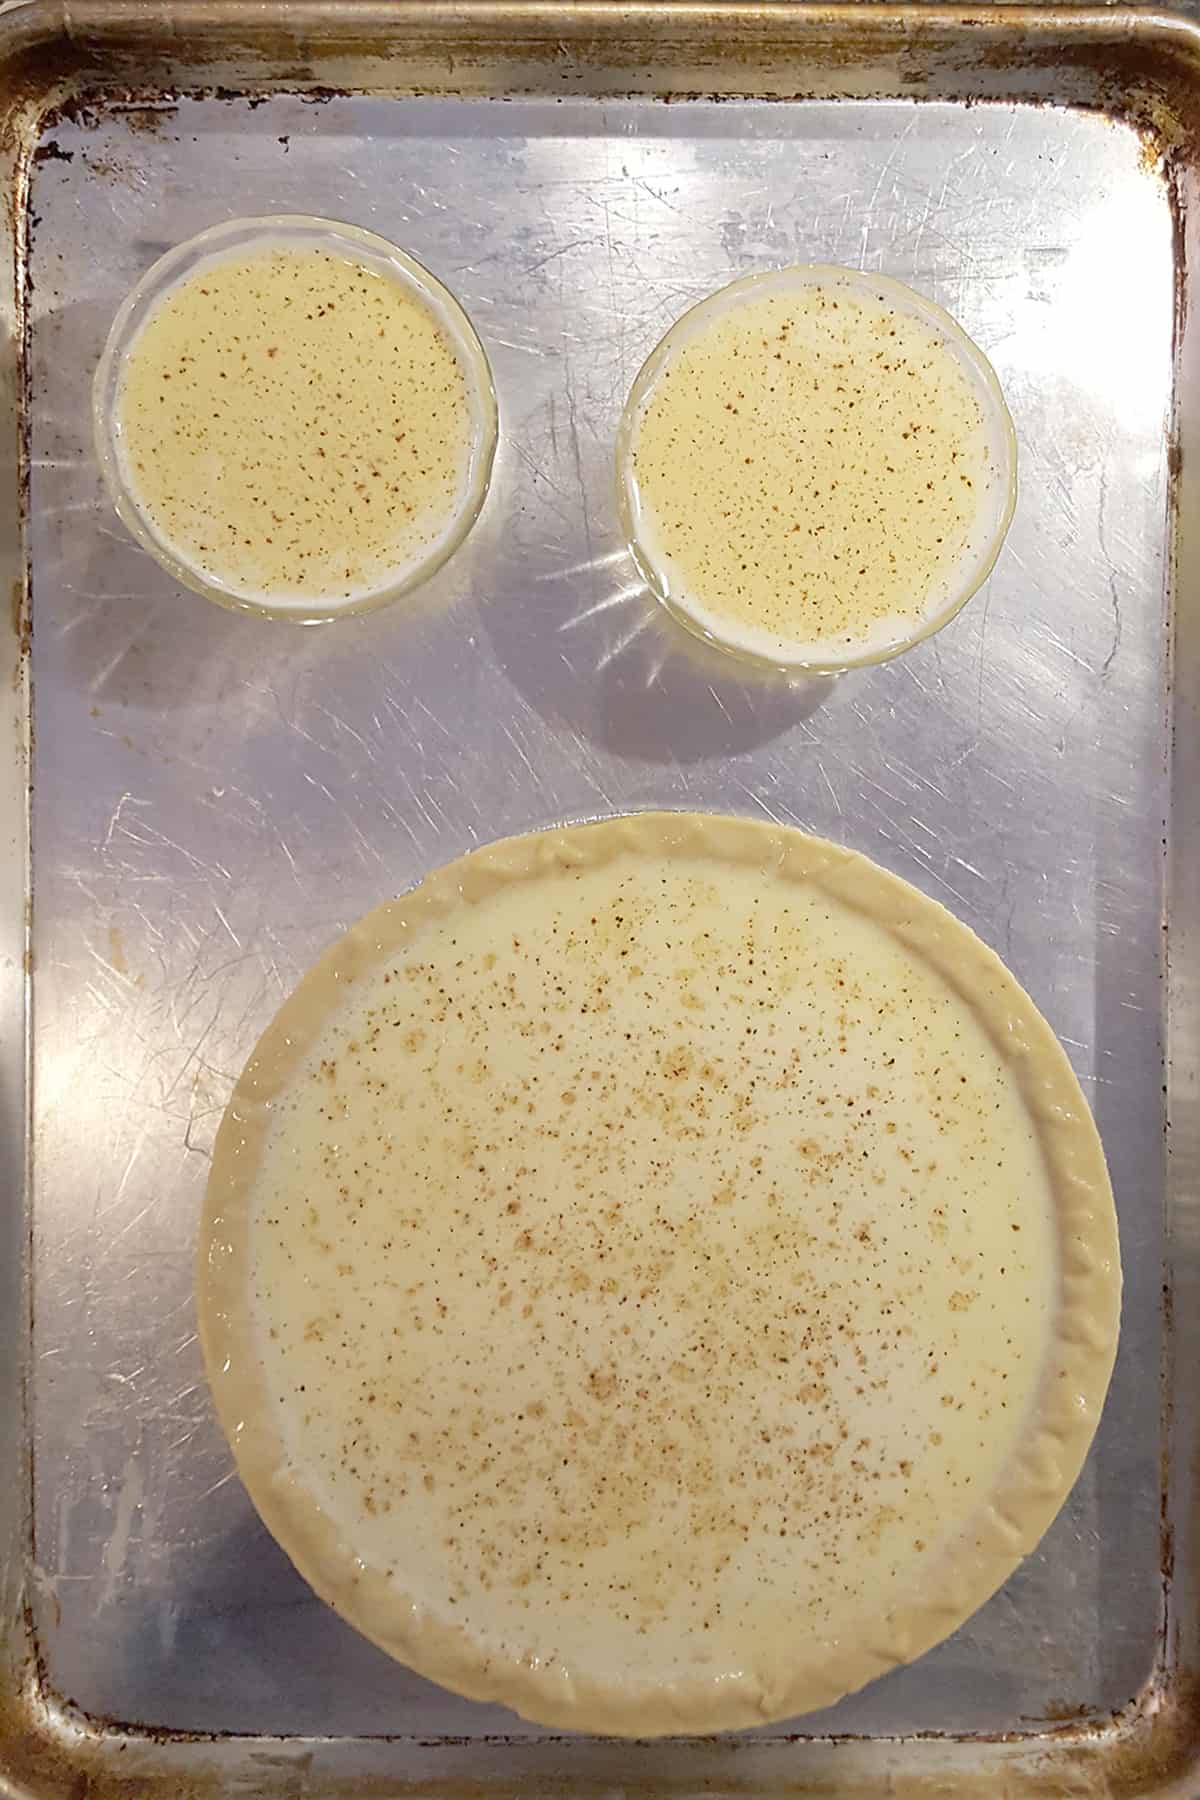 Filled pie crust and two filled custard cups on a baking sheet.